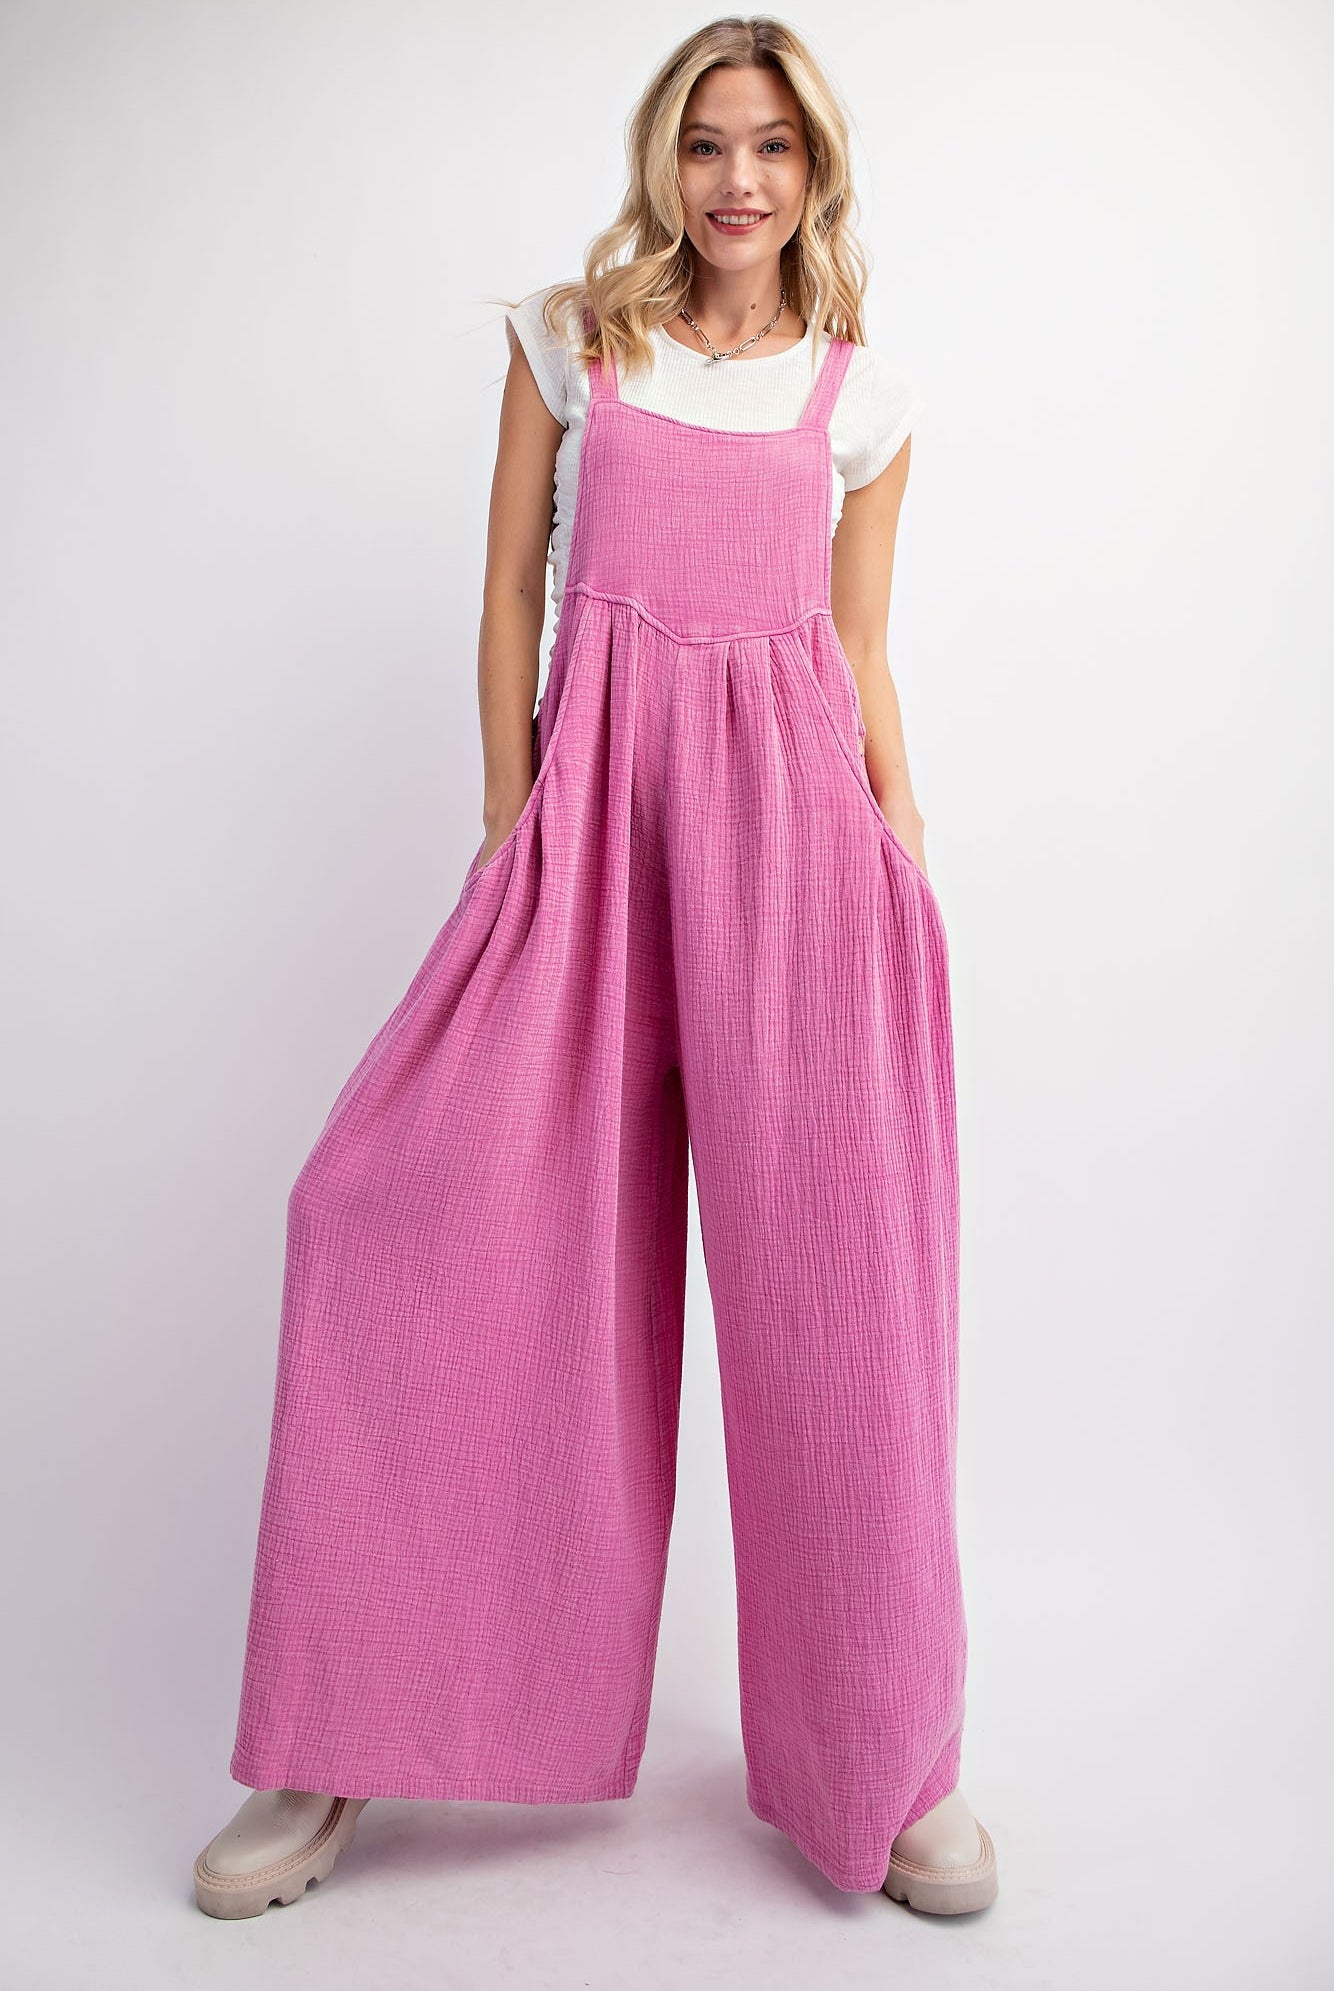 Ford Mineral Washed Palazzo Jumpsuit - Be You Boutique